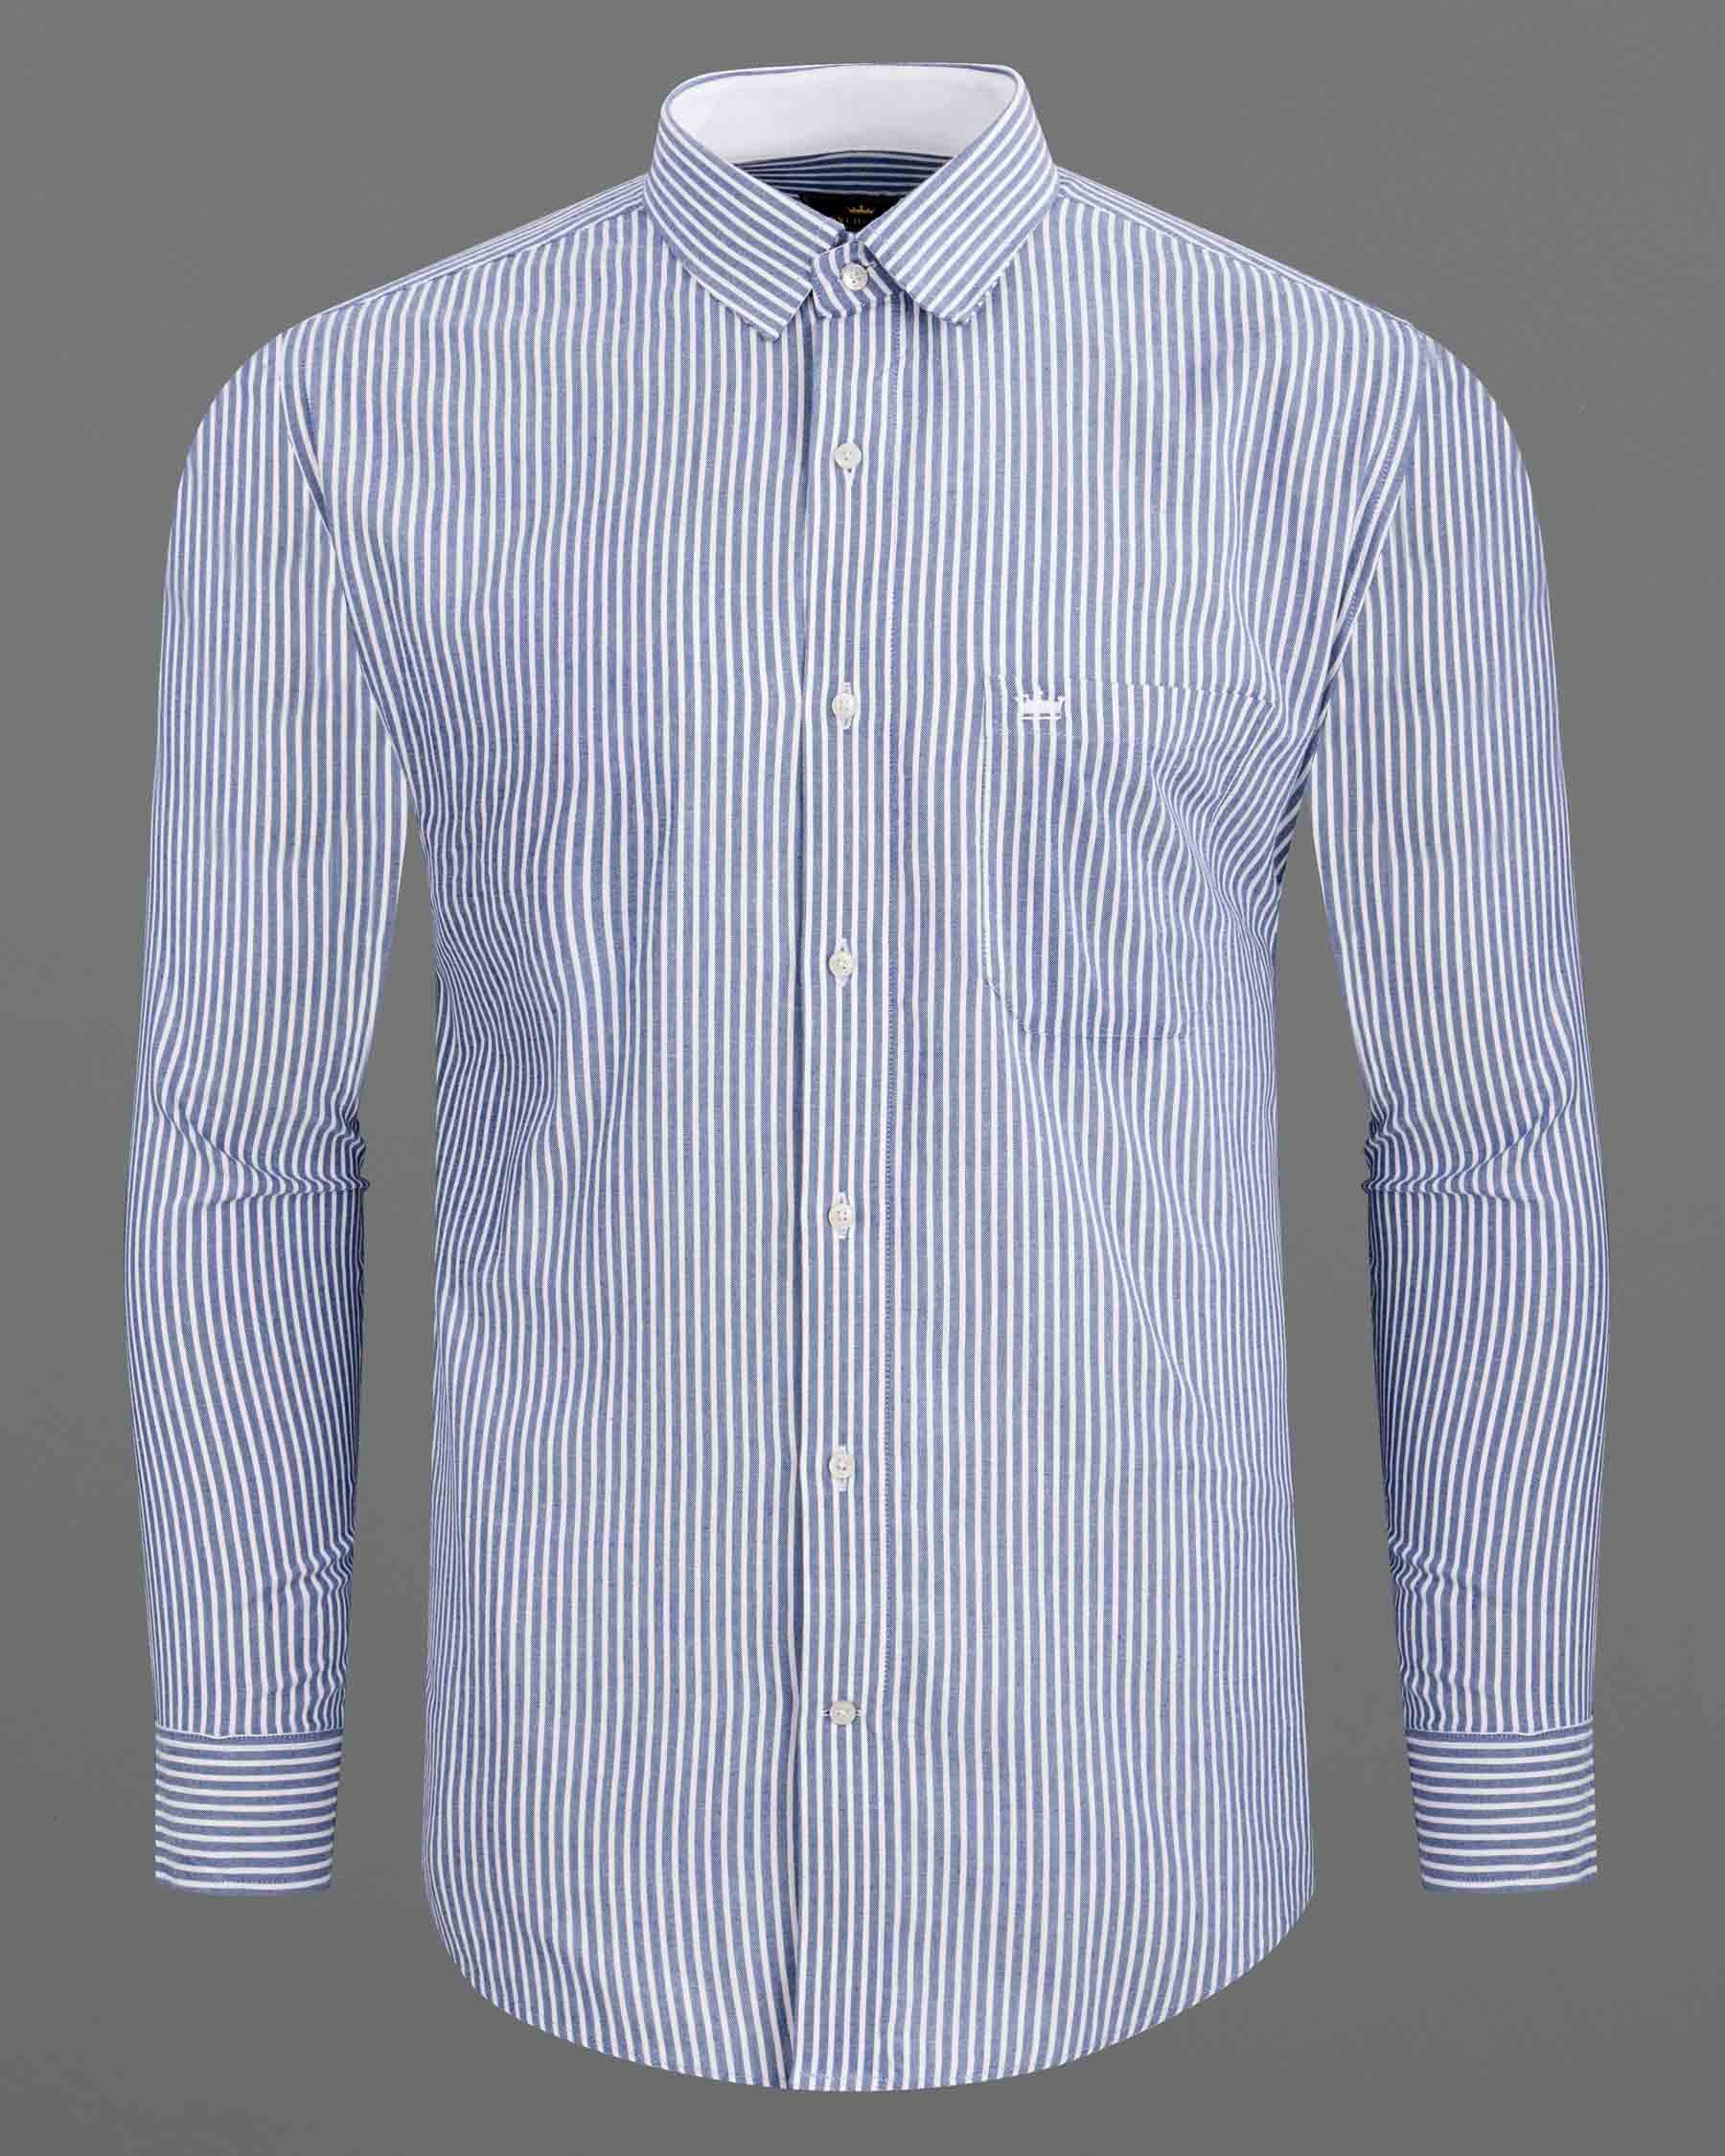 Chetwode Blue with White Striped Royal Oxford Shirt